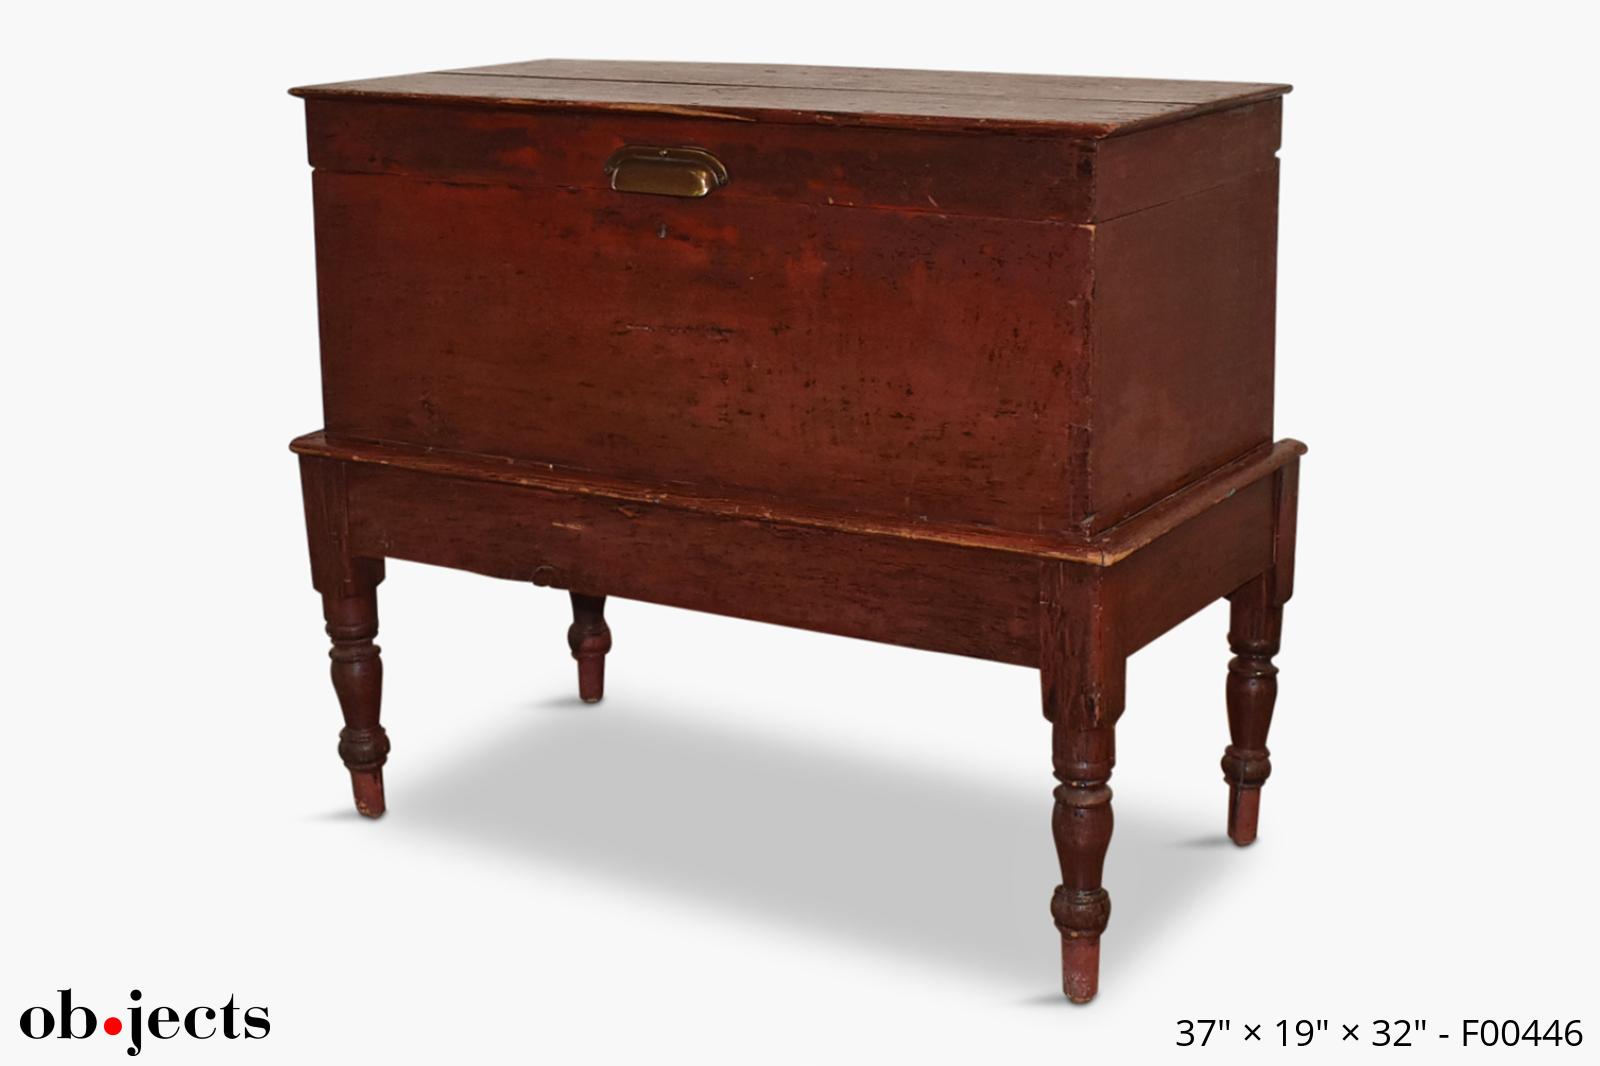 Trunk on Stand Distressed Burgundy Red | Ob•jects